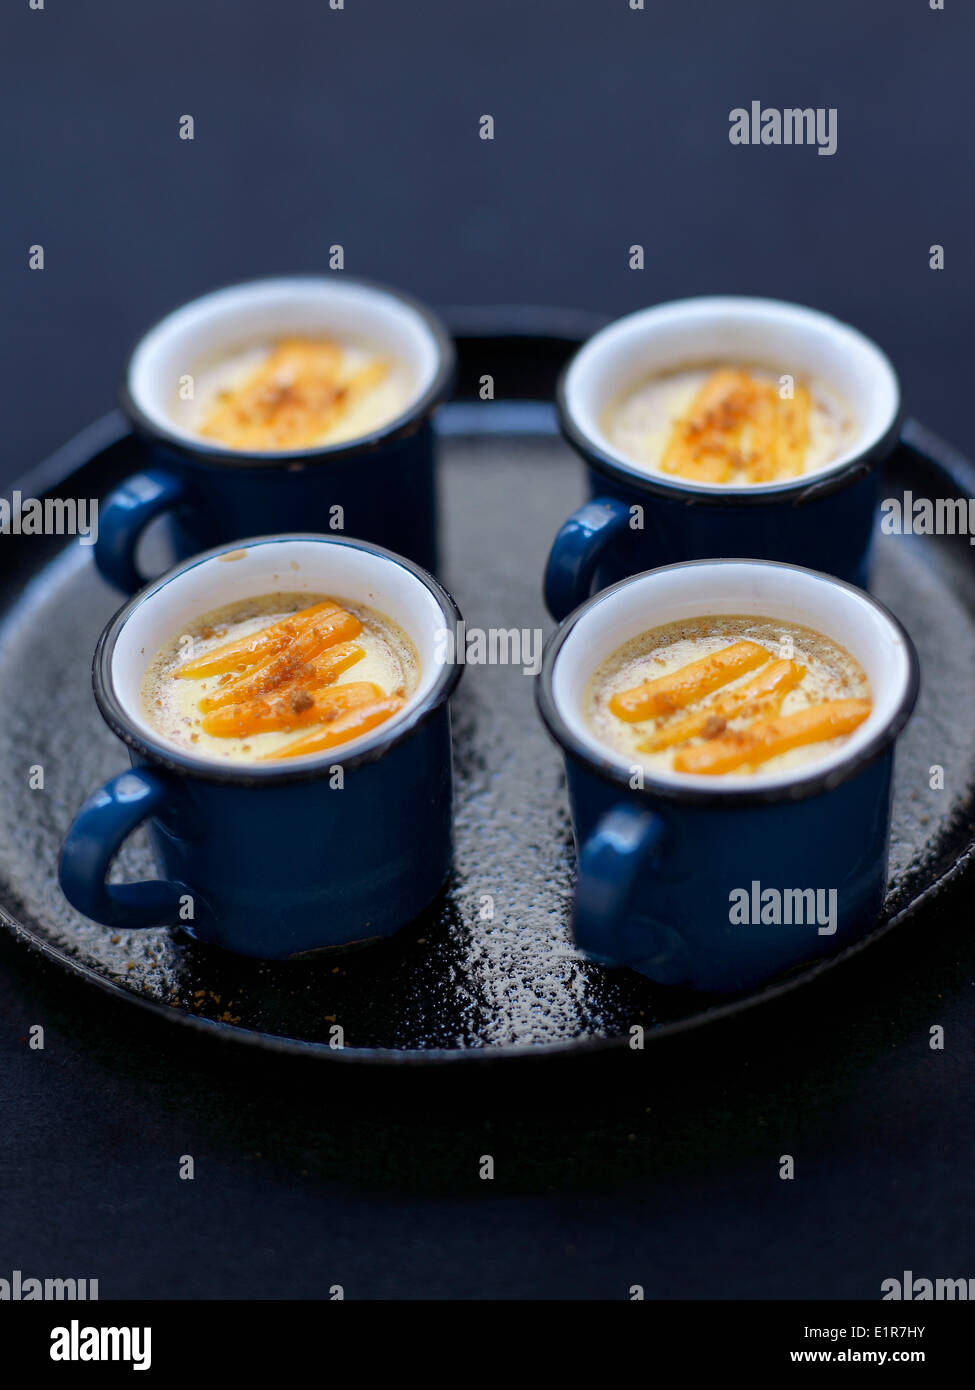 Aged mimolette and Spéculos savoury baked egg custard Stock Photo